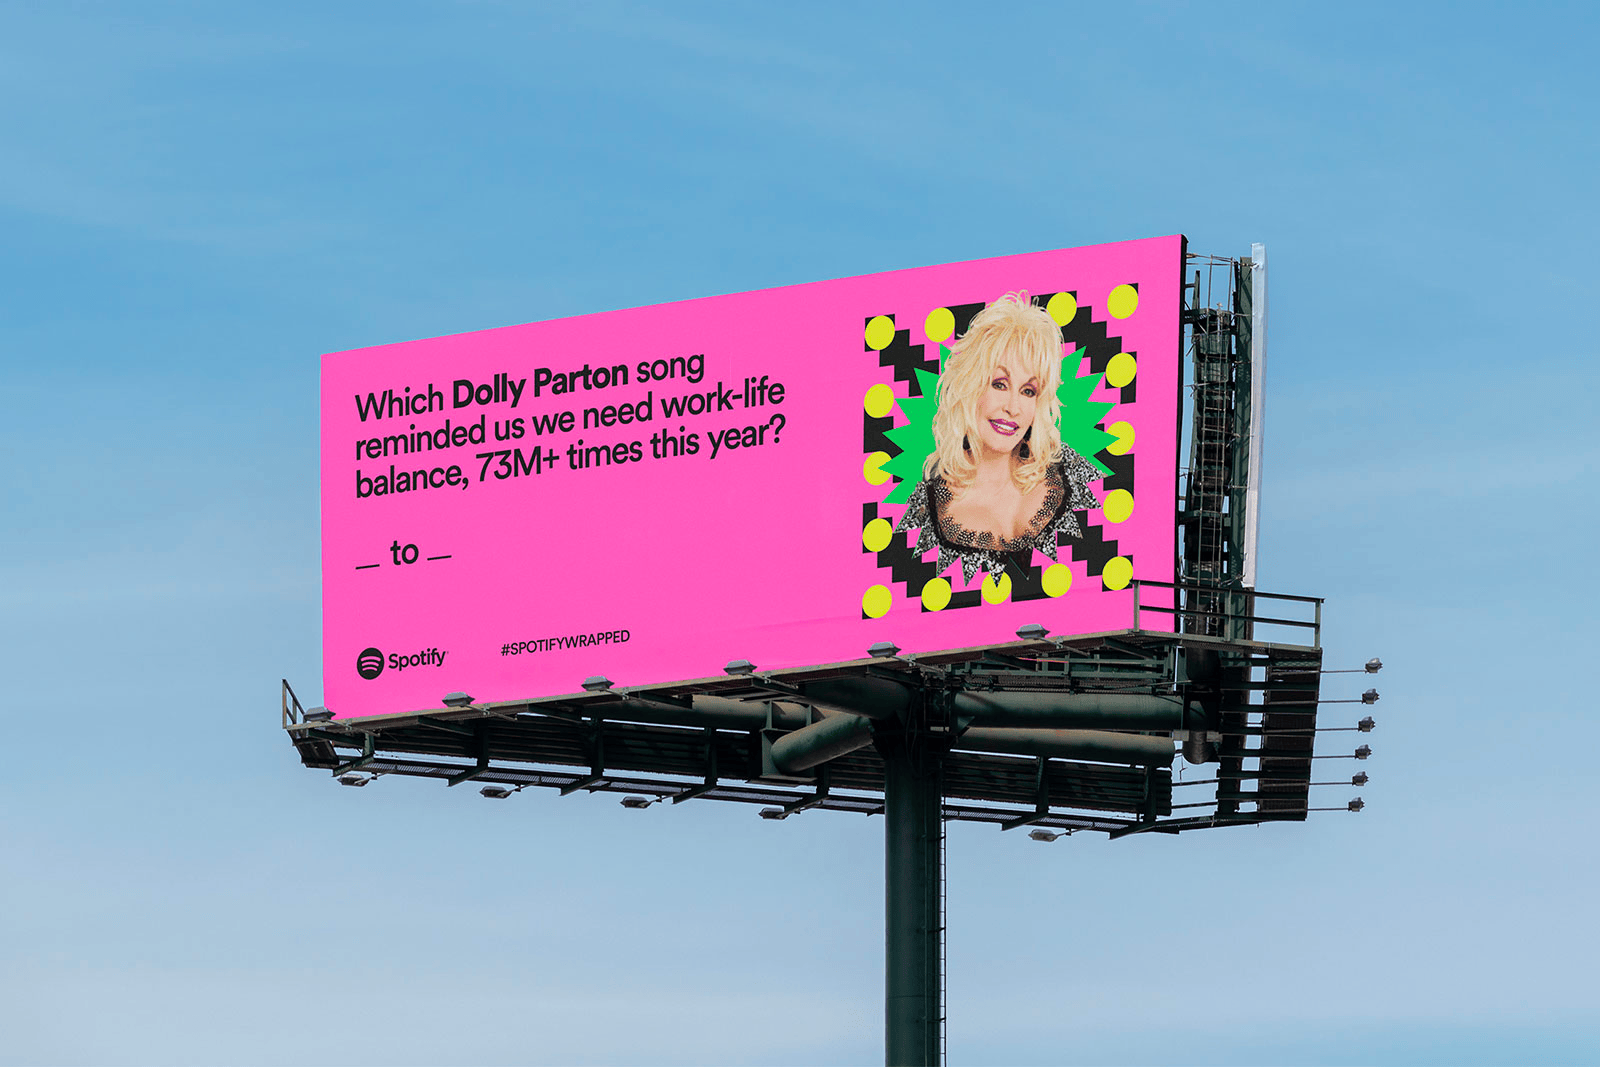 Spotify's billboard with "Which Dolly Parton son reminded us we need work-life balance, 73M+ times this year?" headline